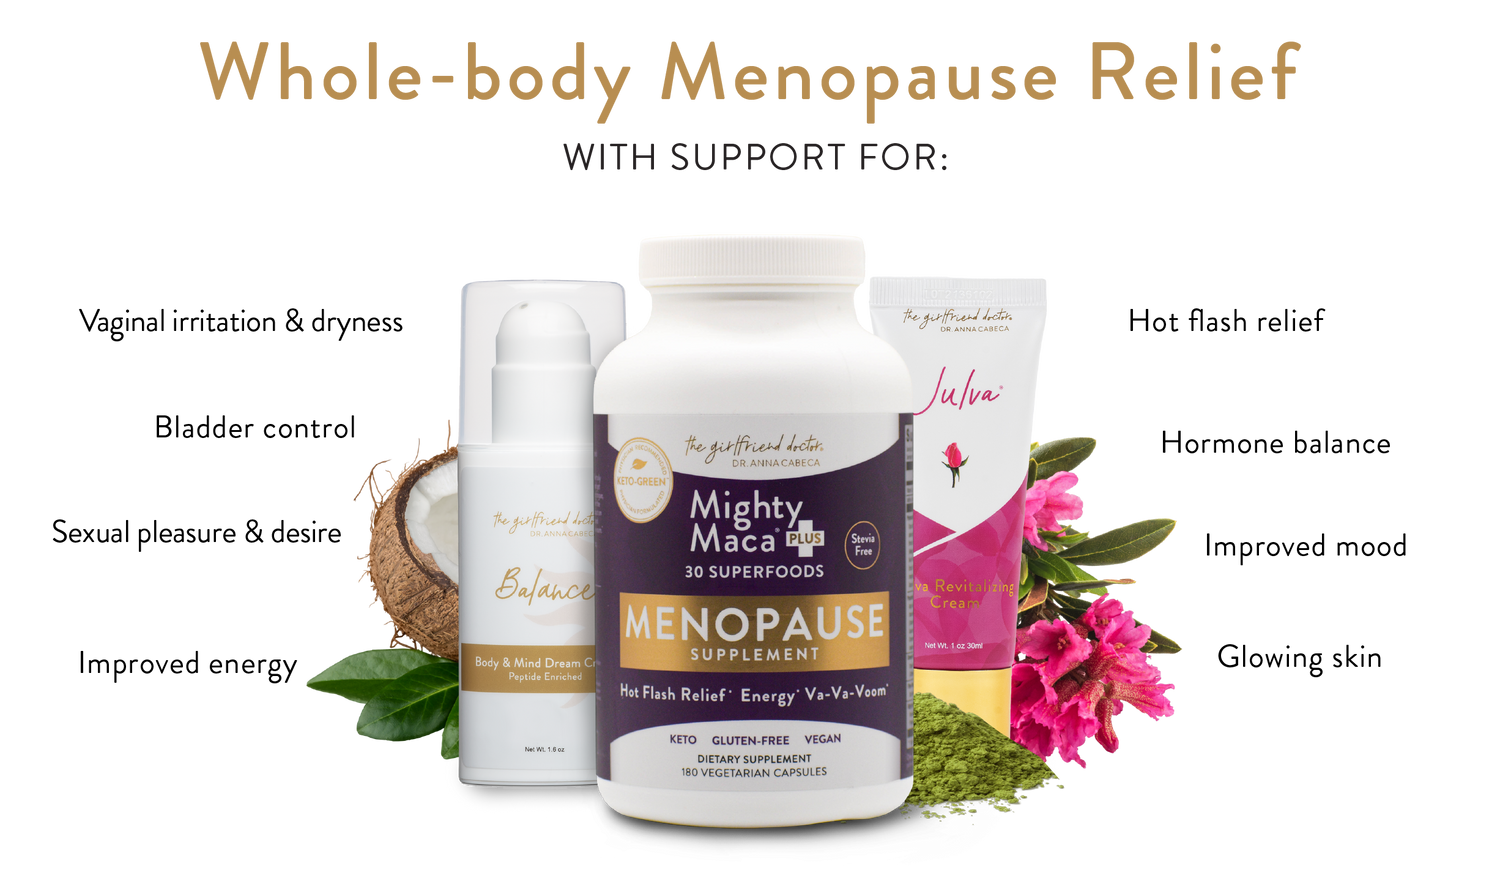 Whole-body menopause relief with support for: vaginal irritation & dryness, glowing skin, bladder control, sexual pleasure & desire, improved energy, hot flash relief, hormone balance, improved mood.